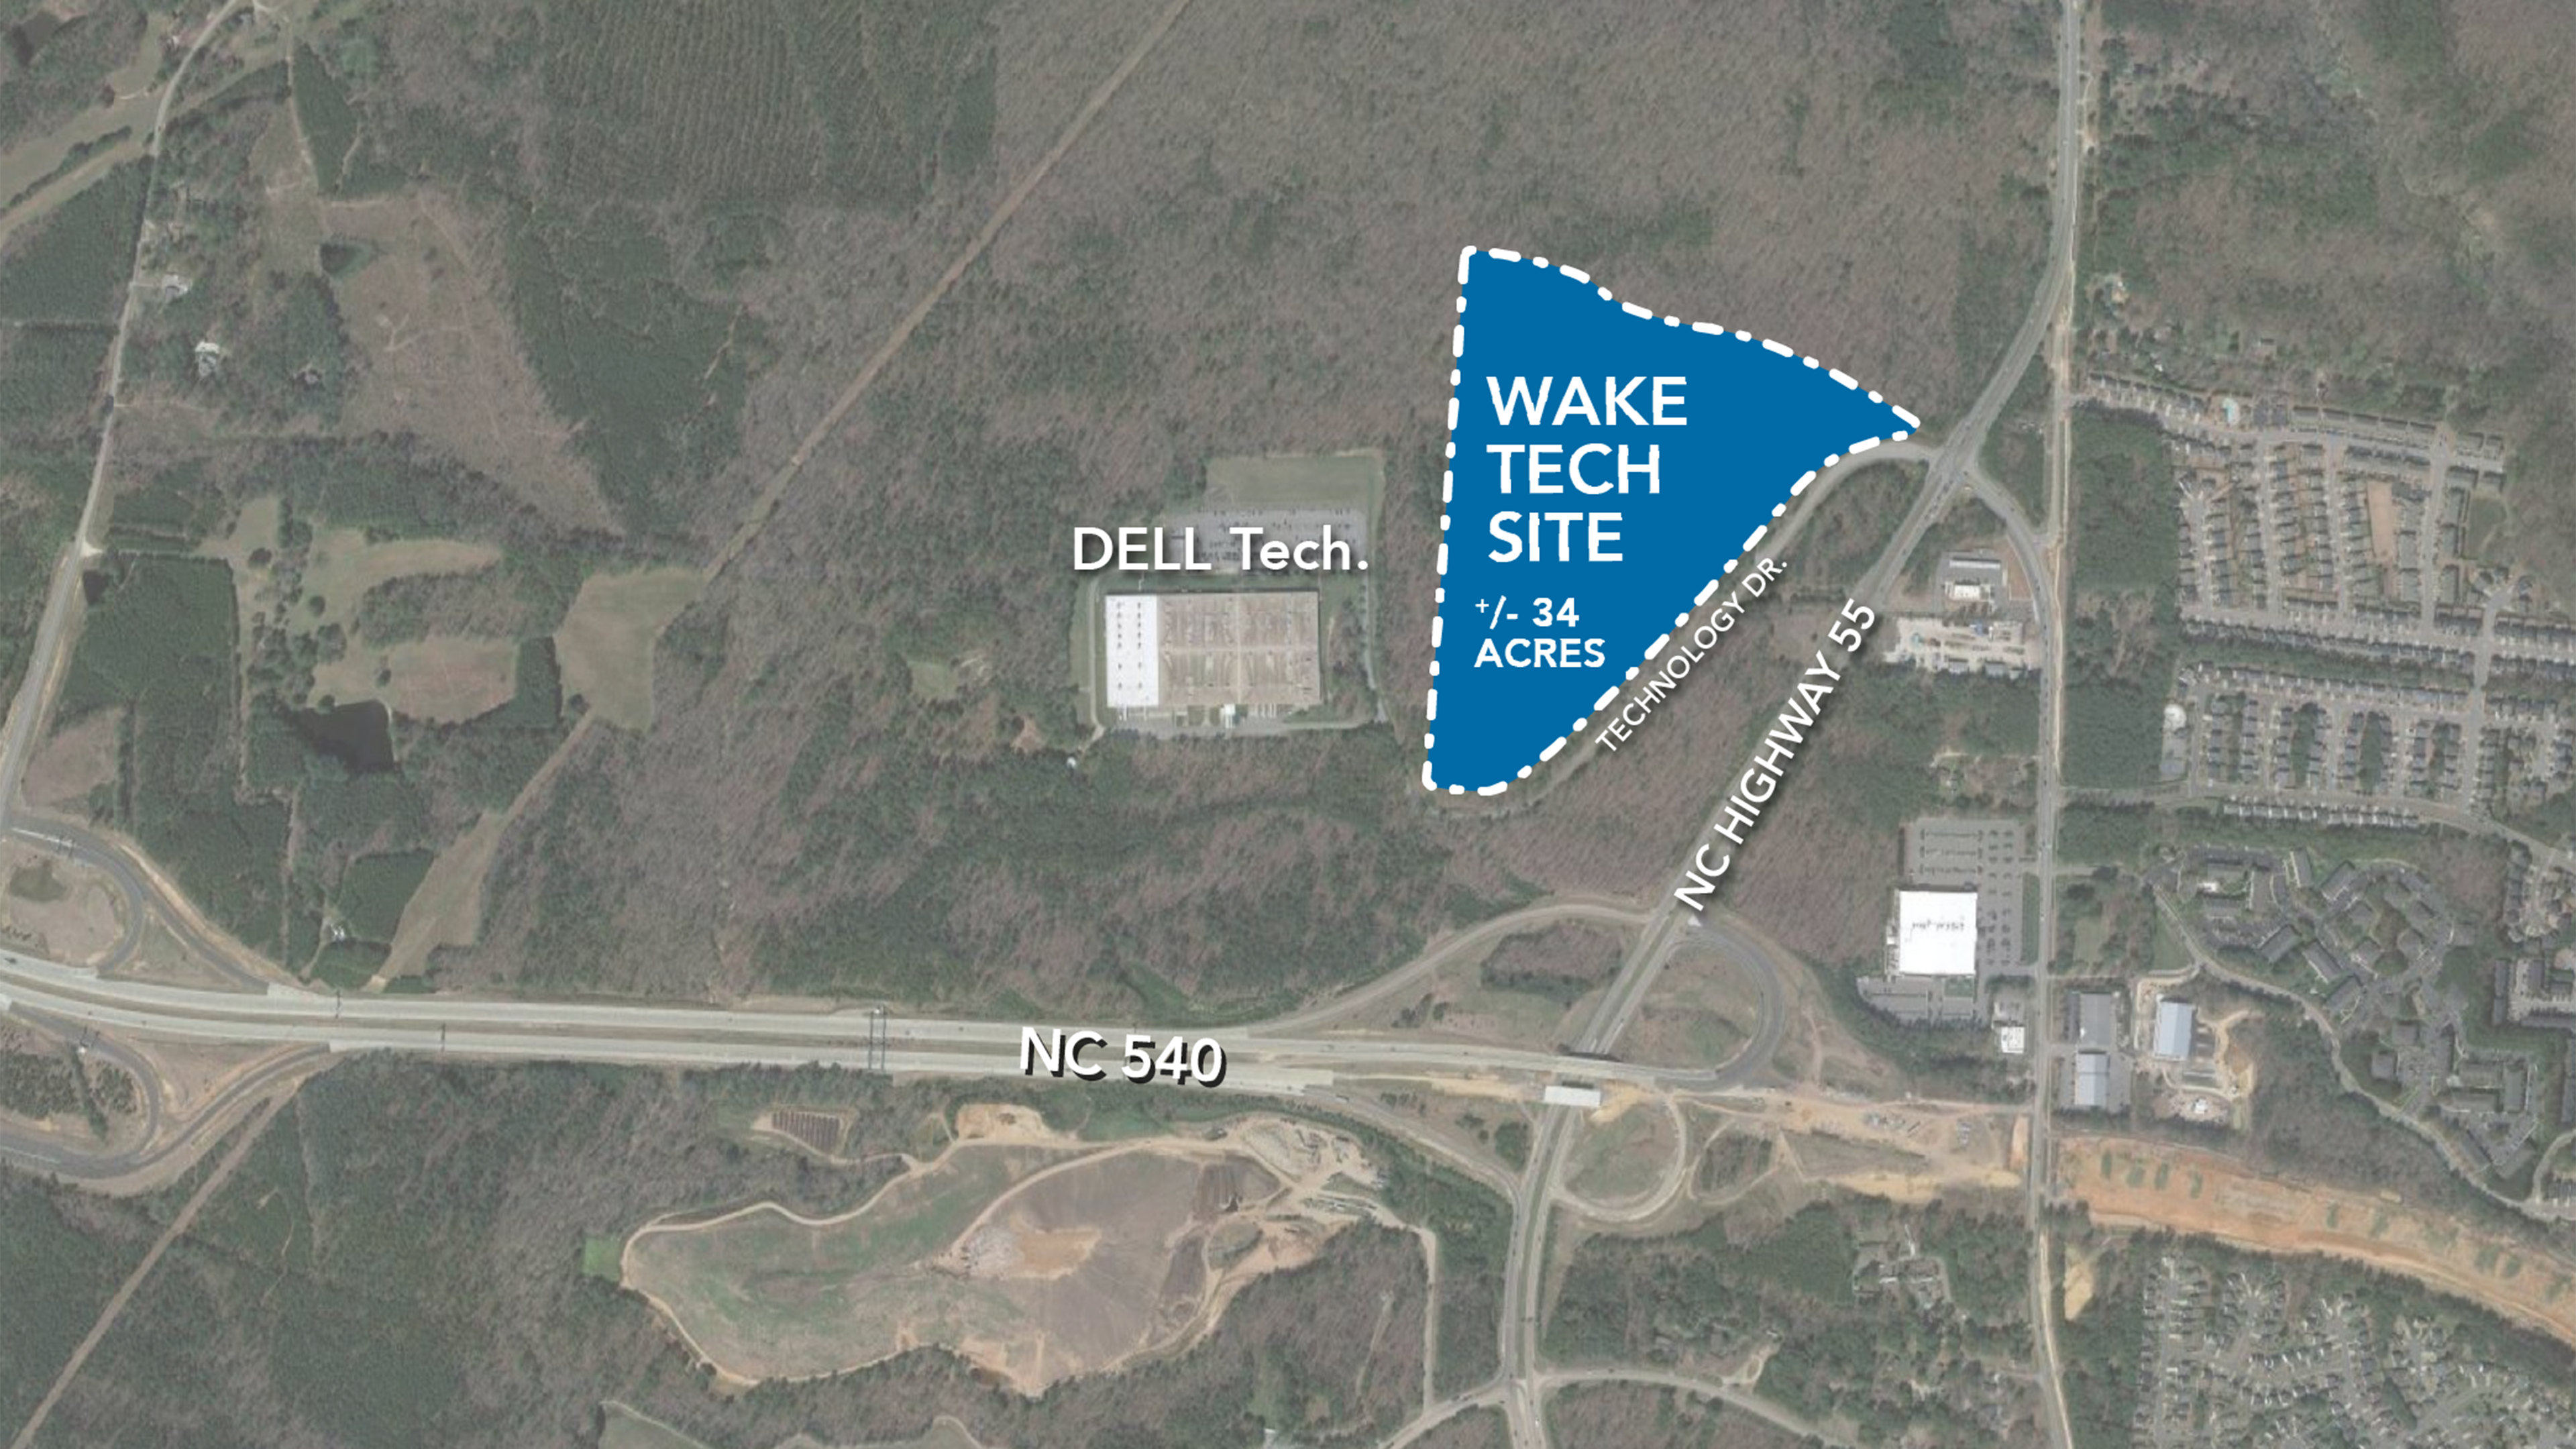 Locator map for new Western Wake Campus